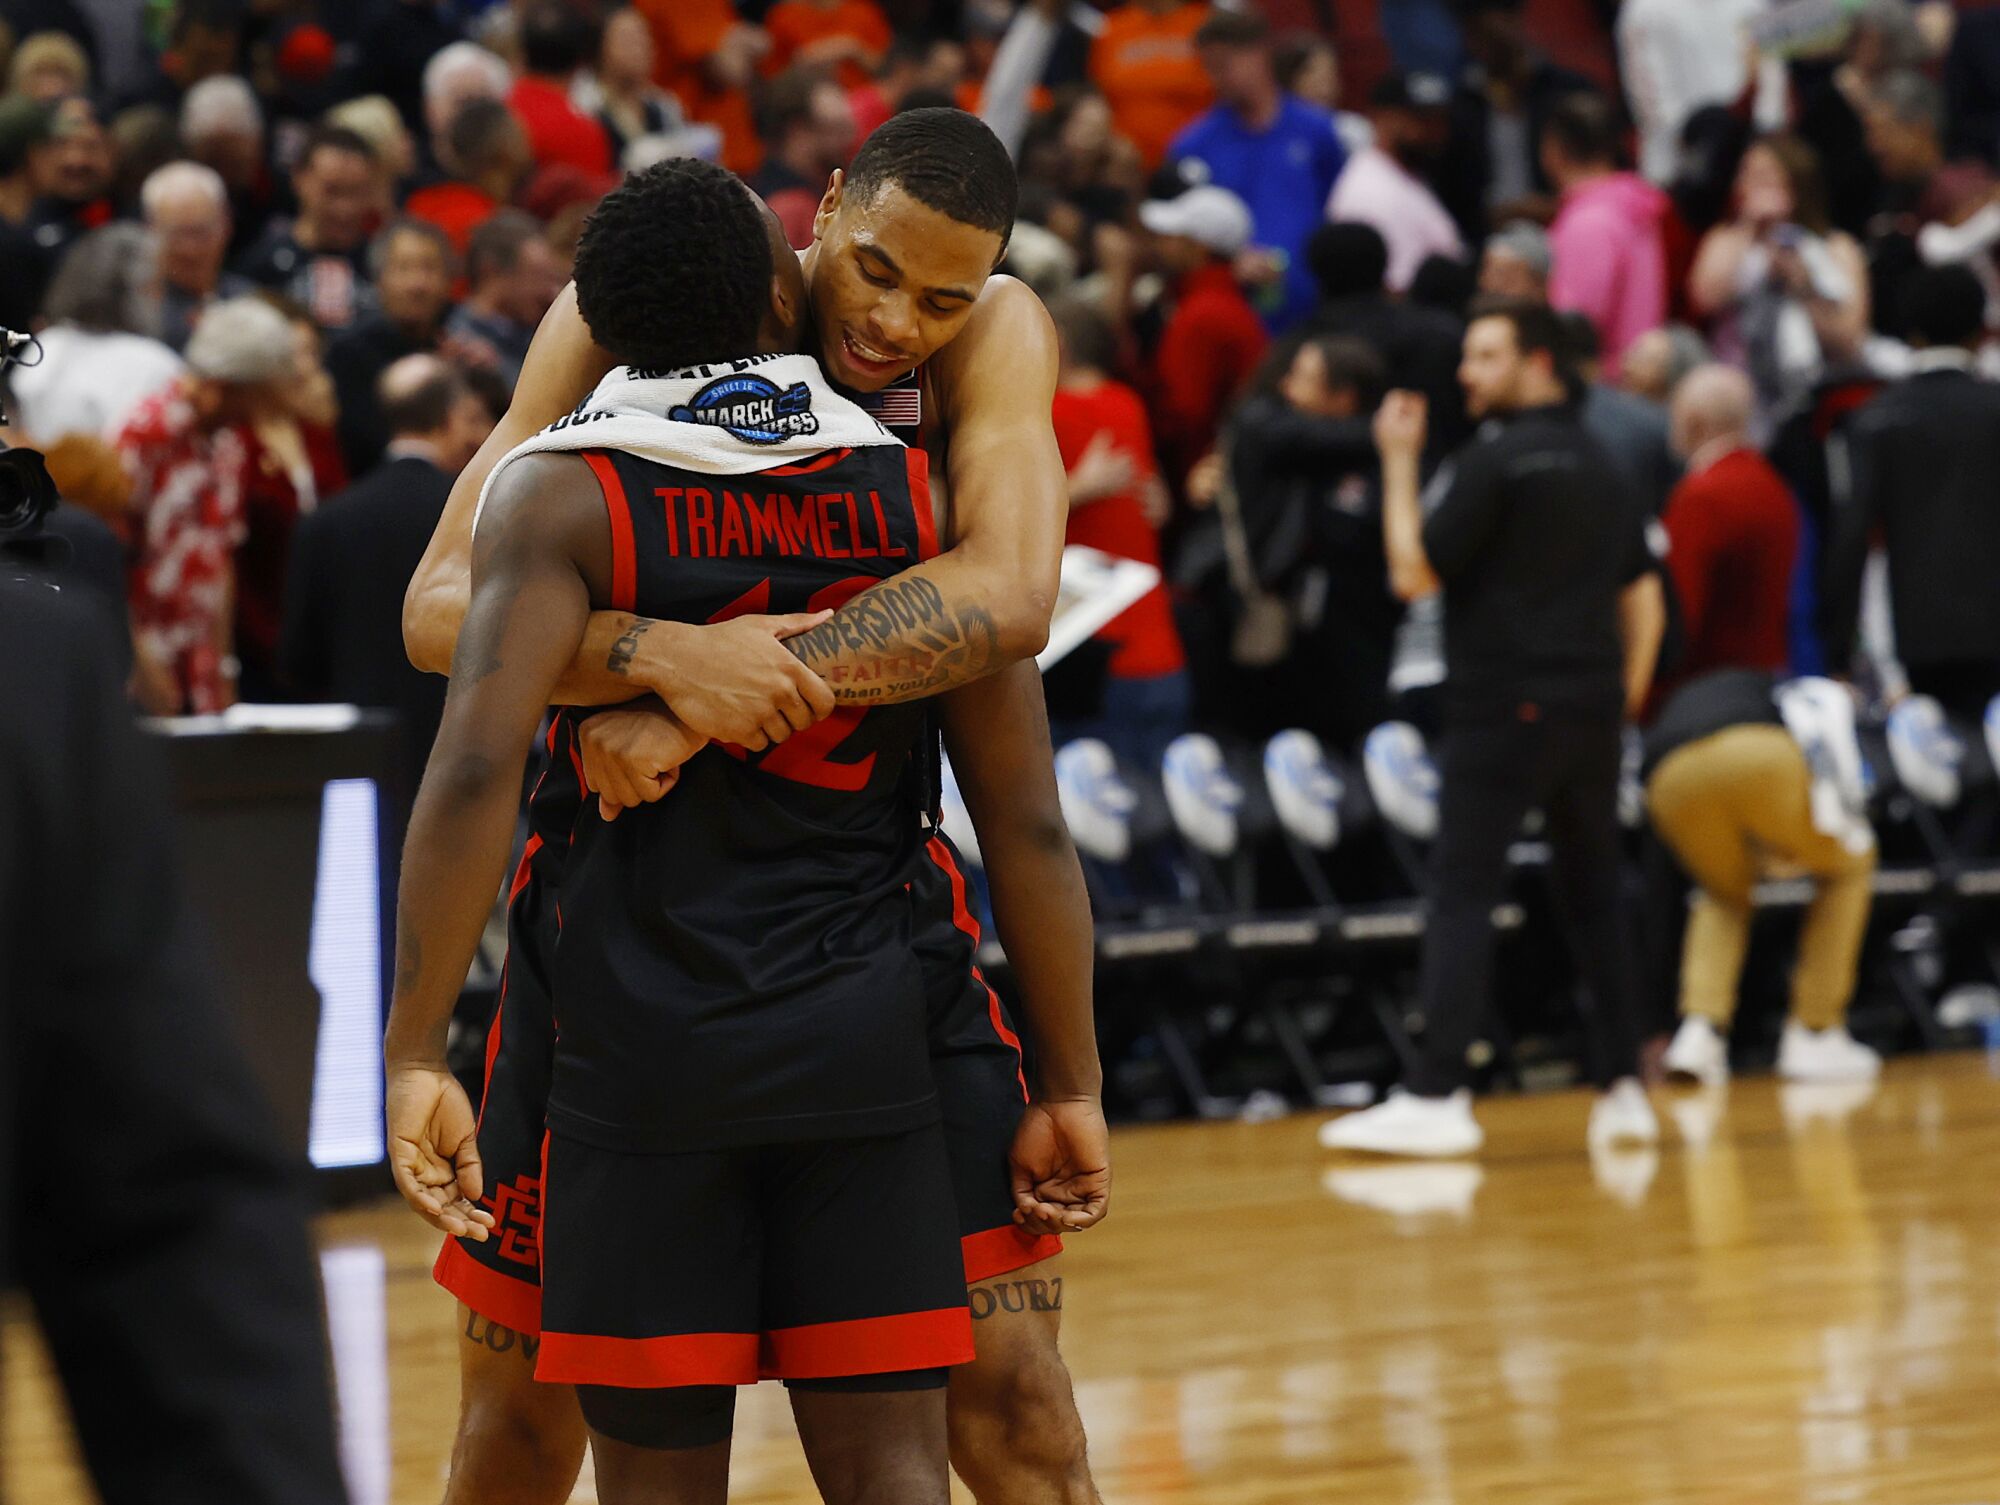 San Diego State's Keshad Johnson and Darrion Trammell